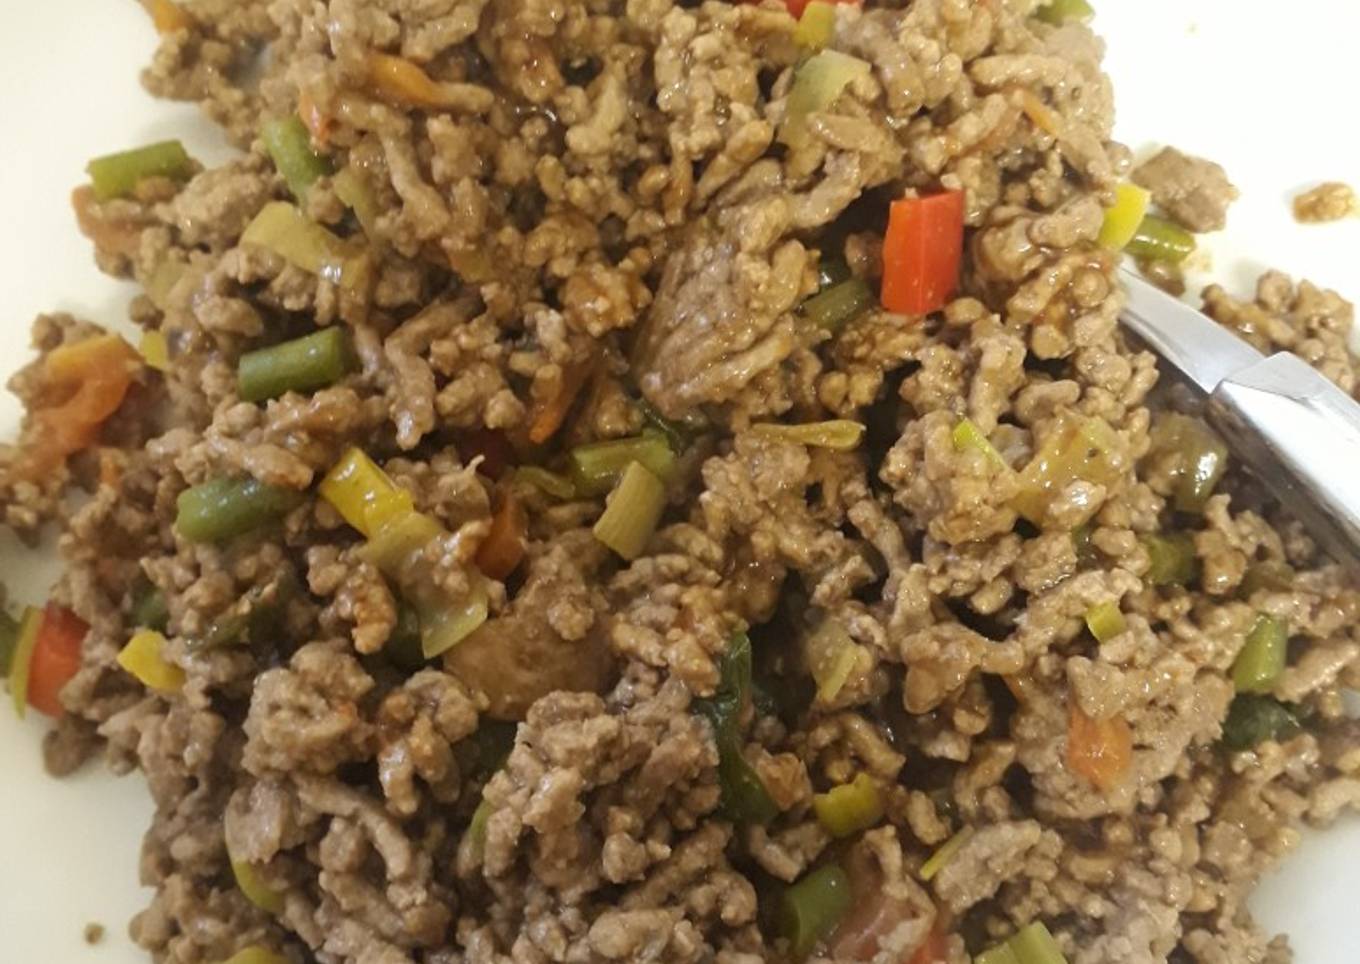 Minced beef and veg